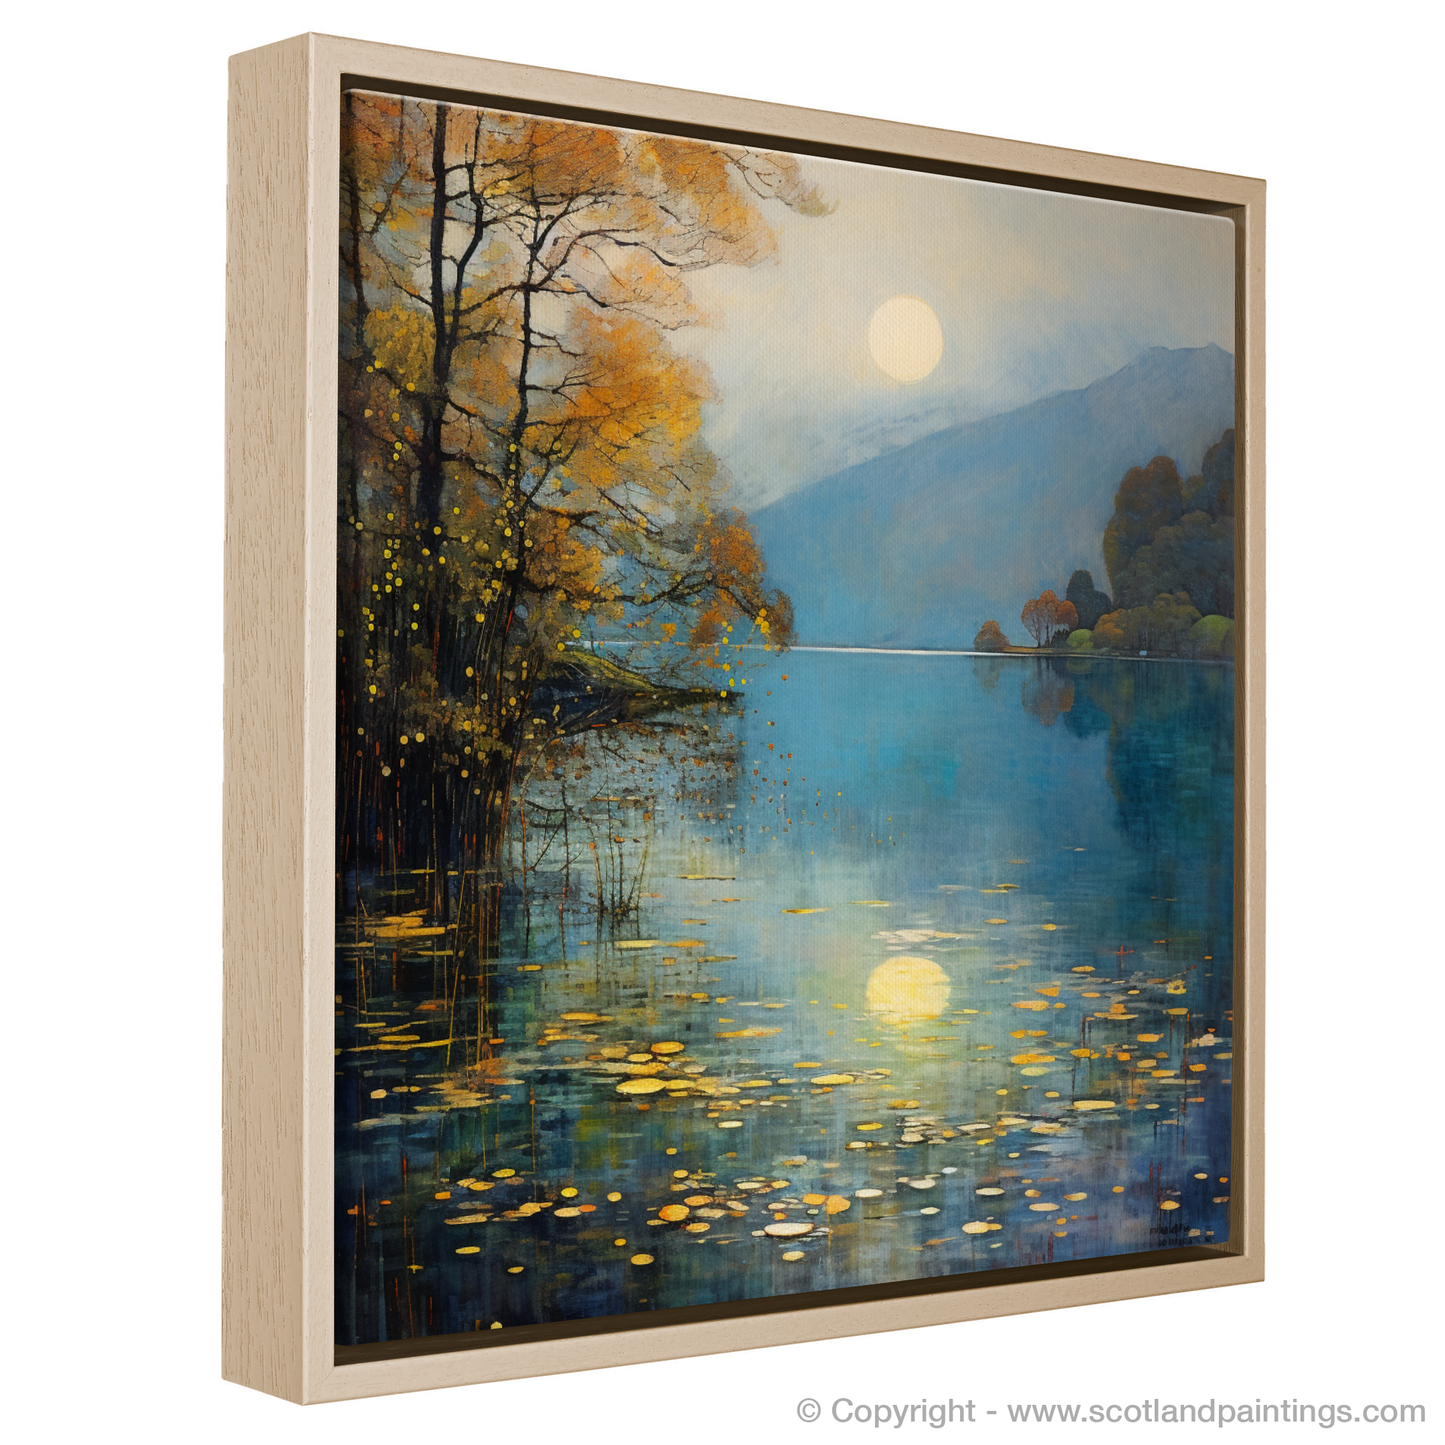 Painting and Art Print of Misty morning on Loch Lomond entitled "Misty Morning Majesty on Loch Lomond".